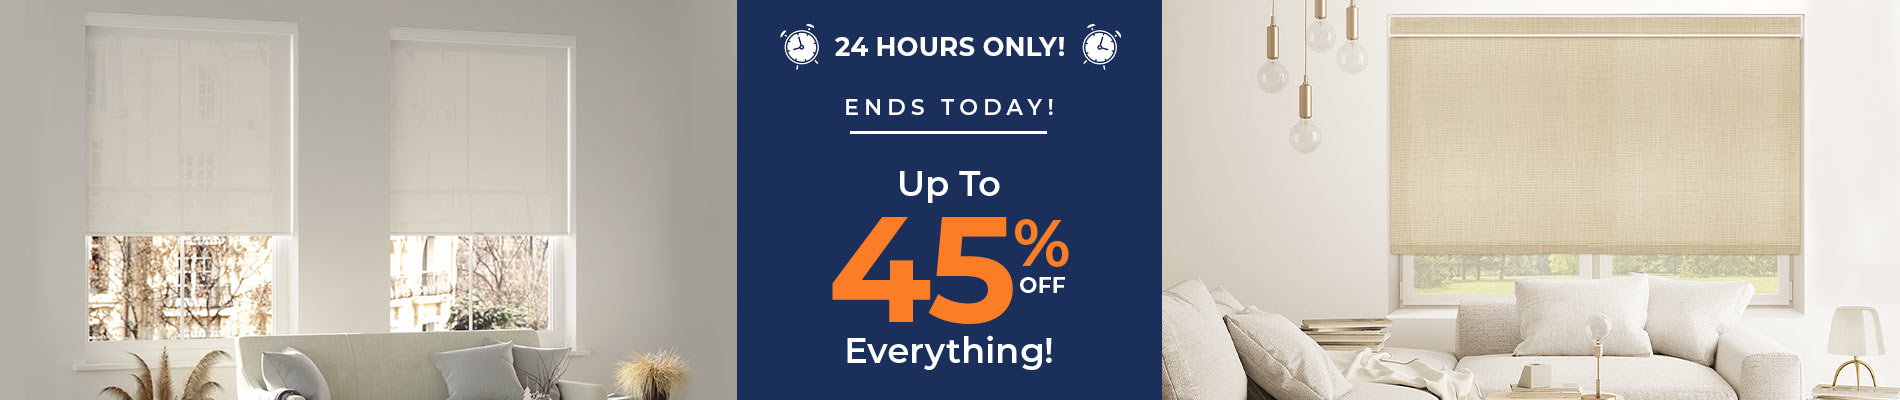 Take Up To 45% Off Everything